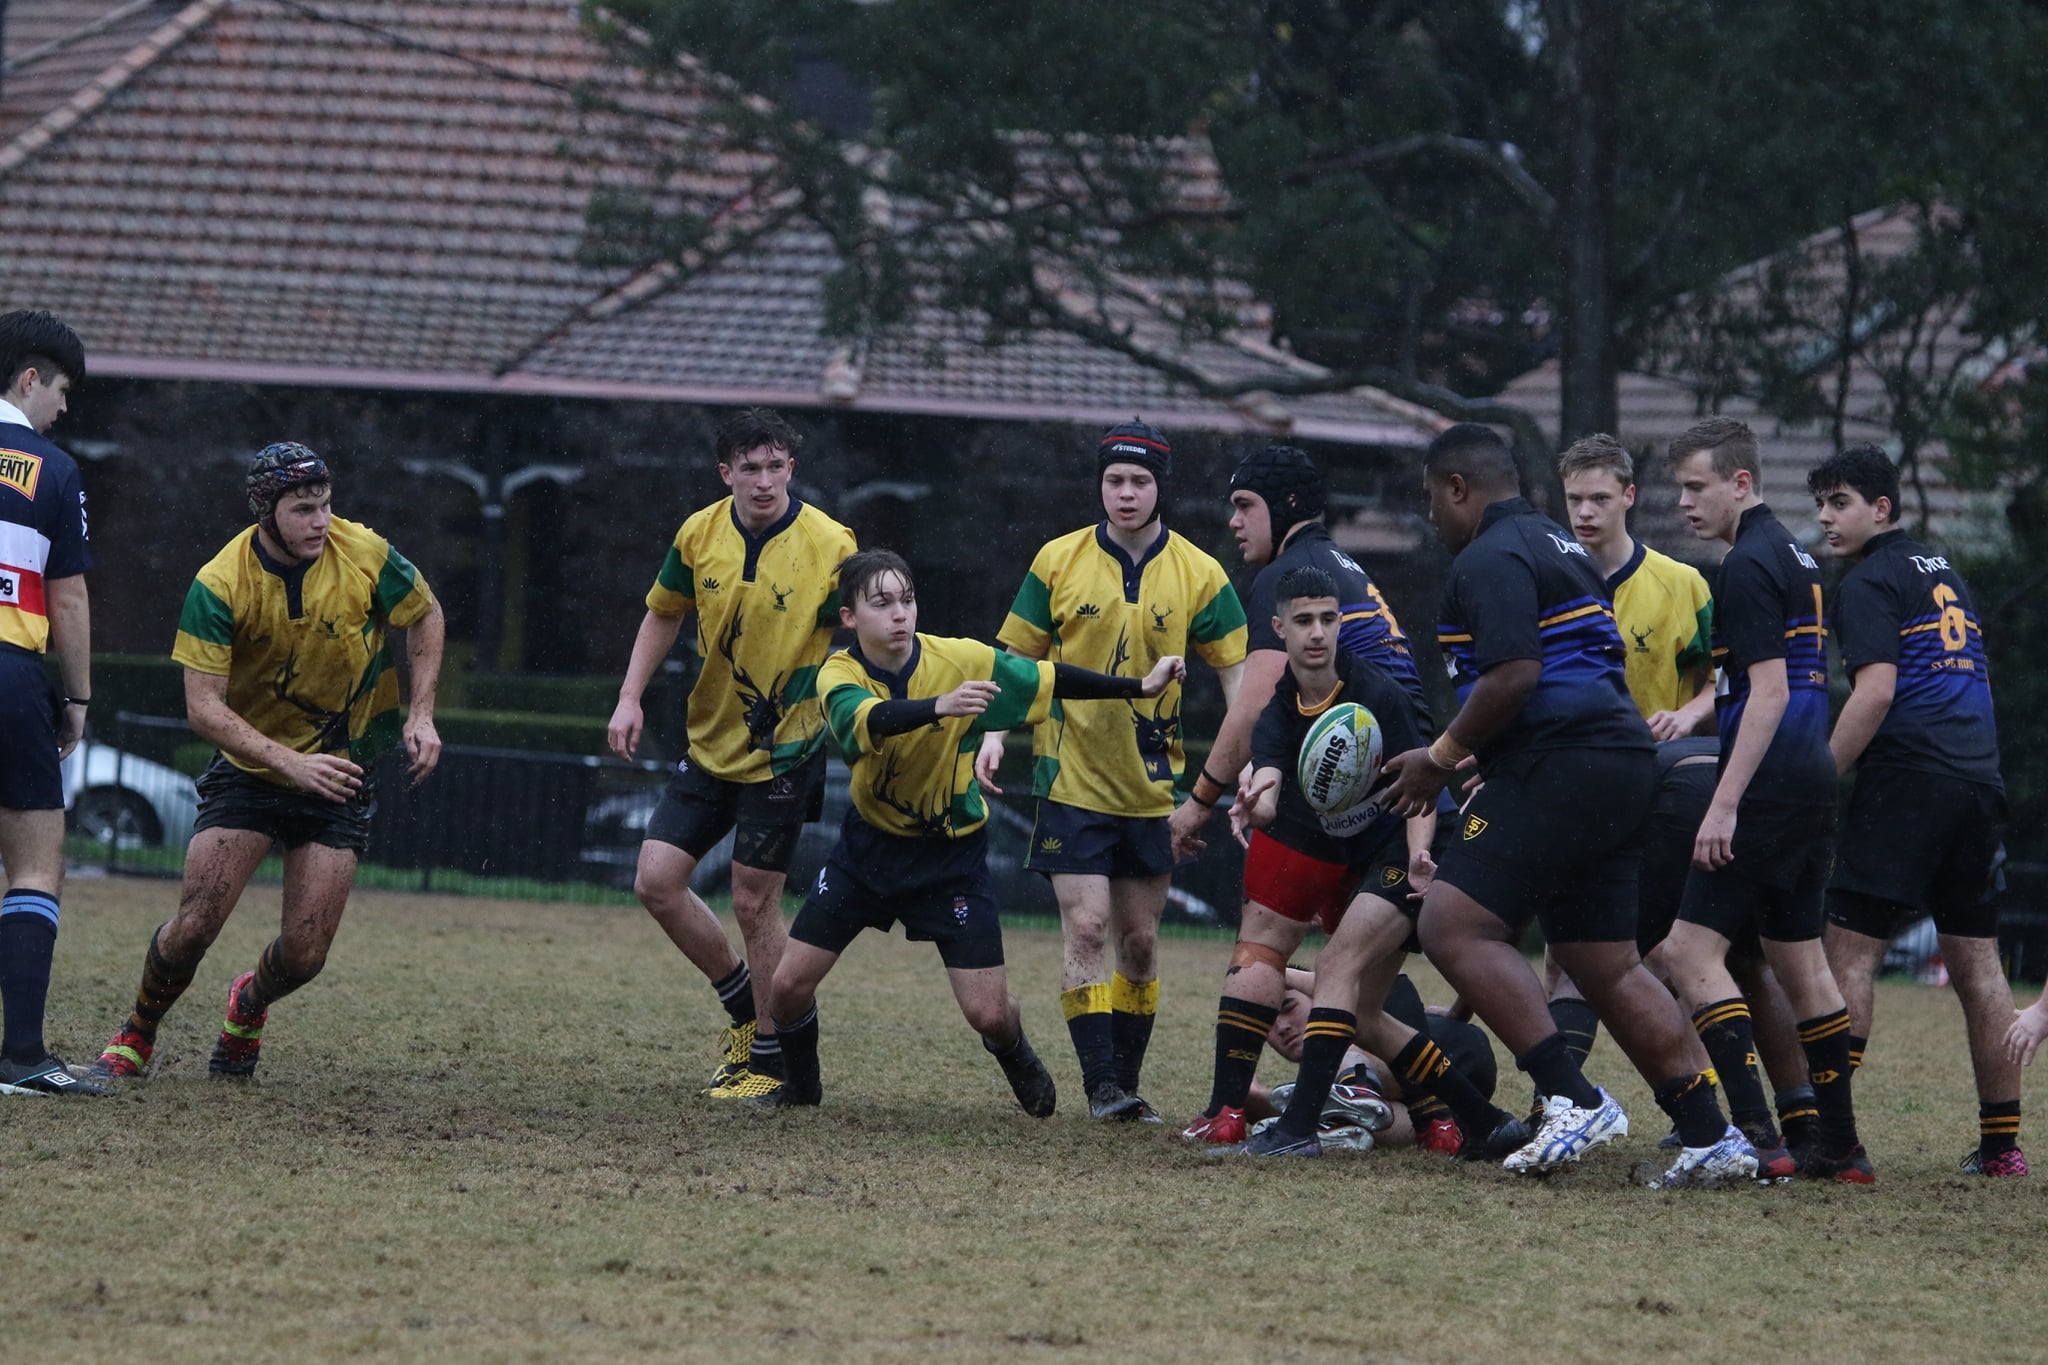 Some of the action from our U16s on the weekend who have combined with Chatswood...